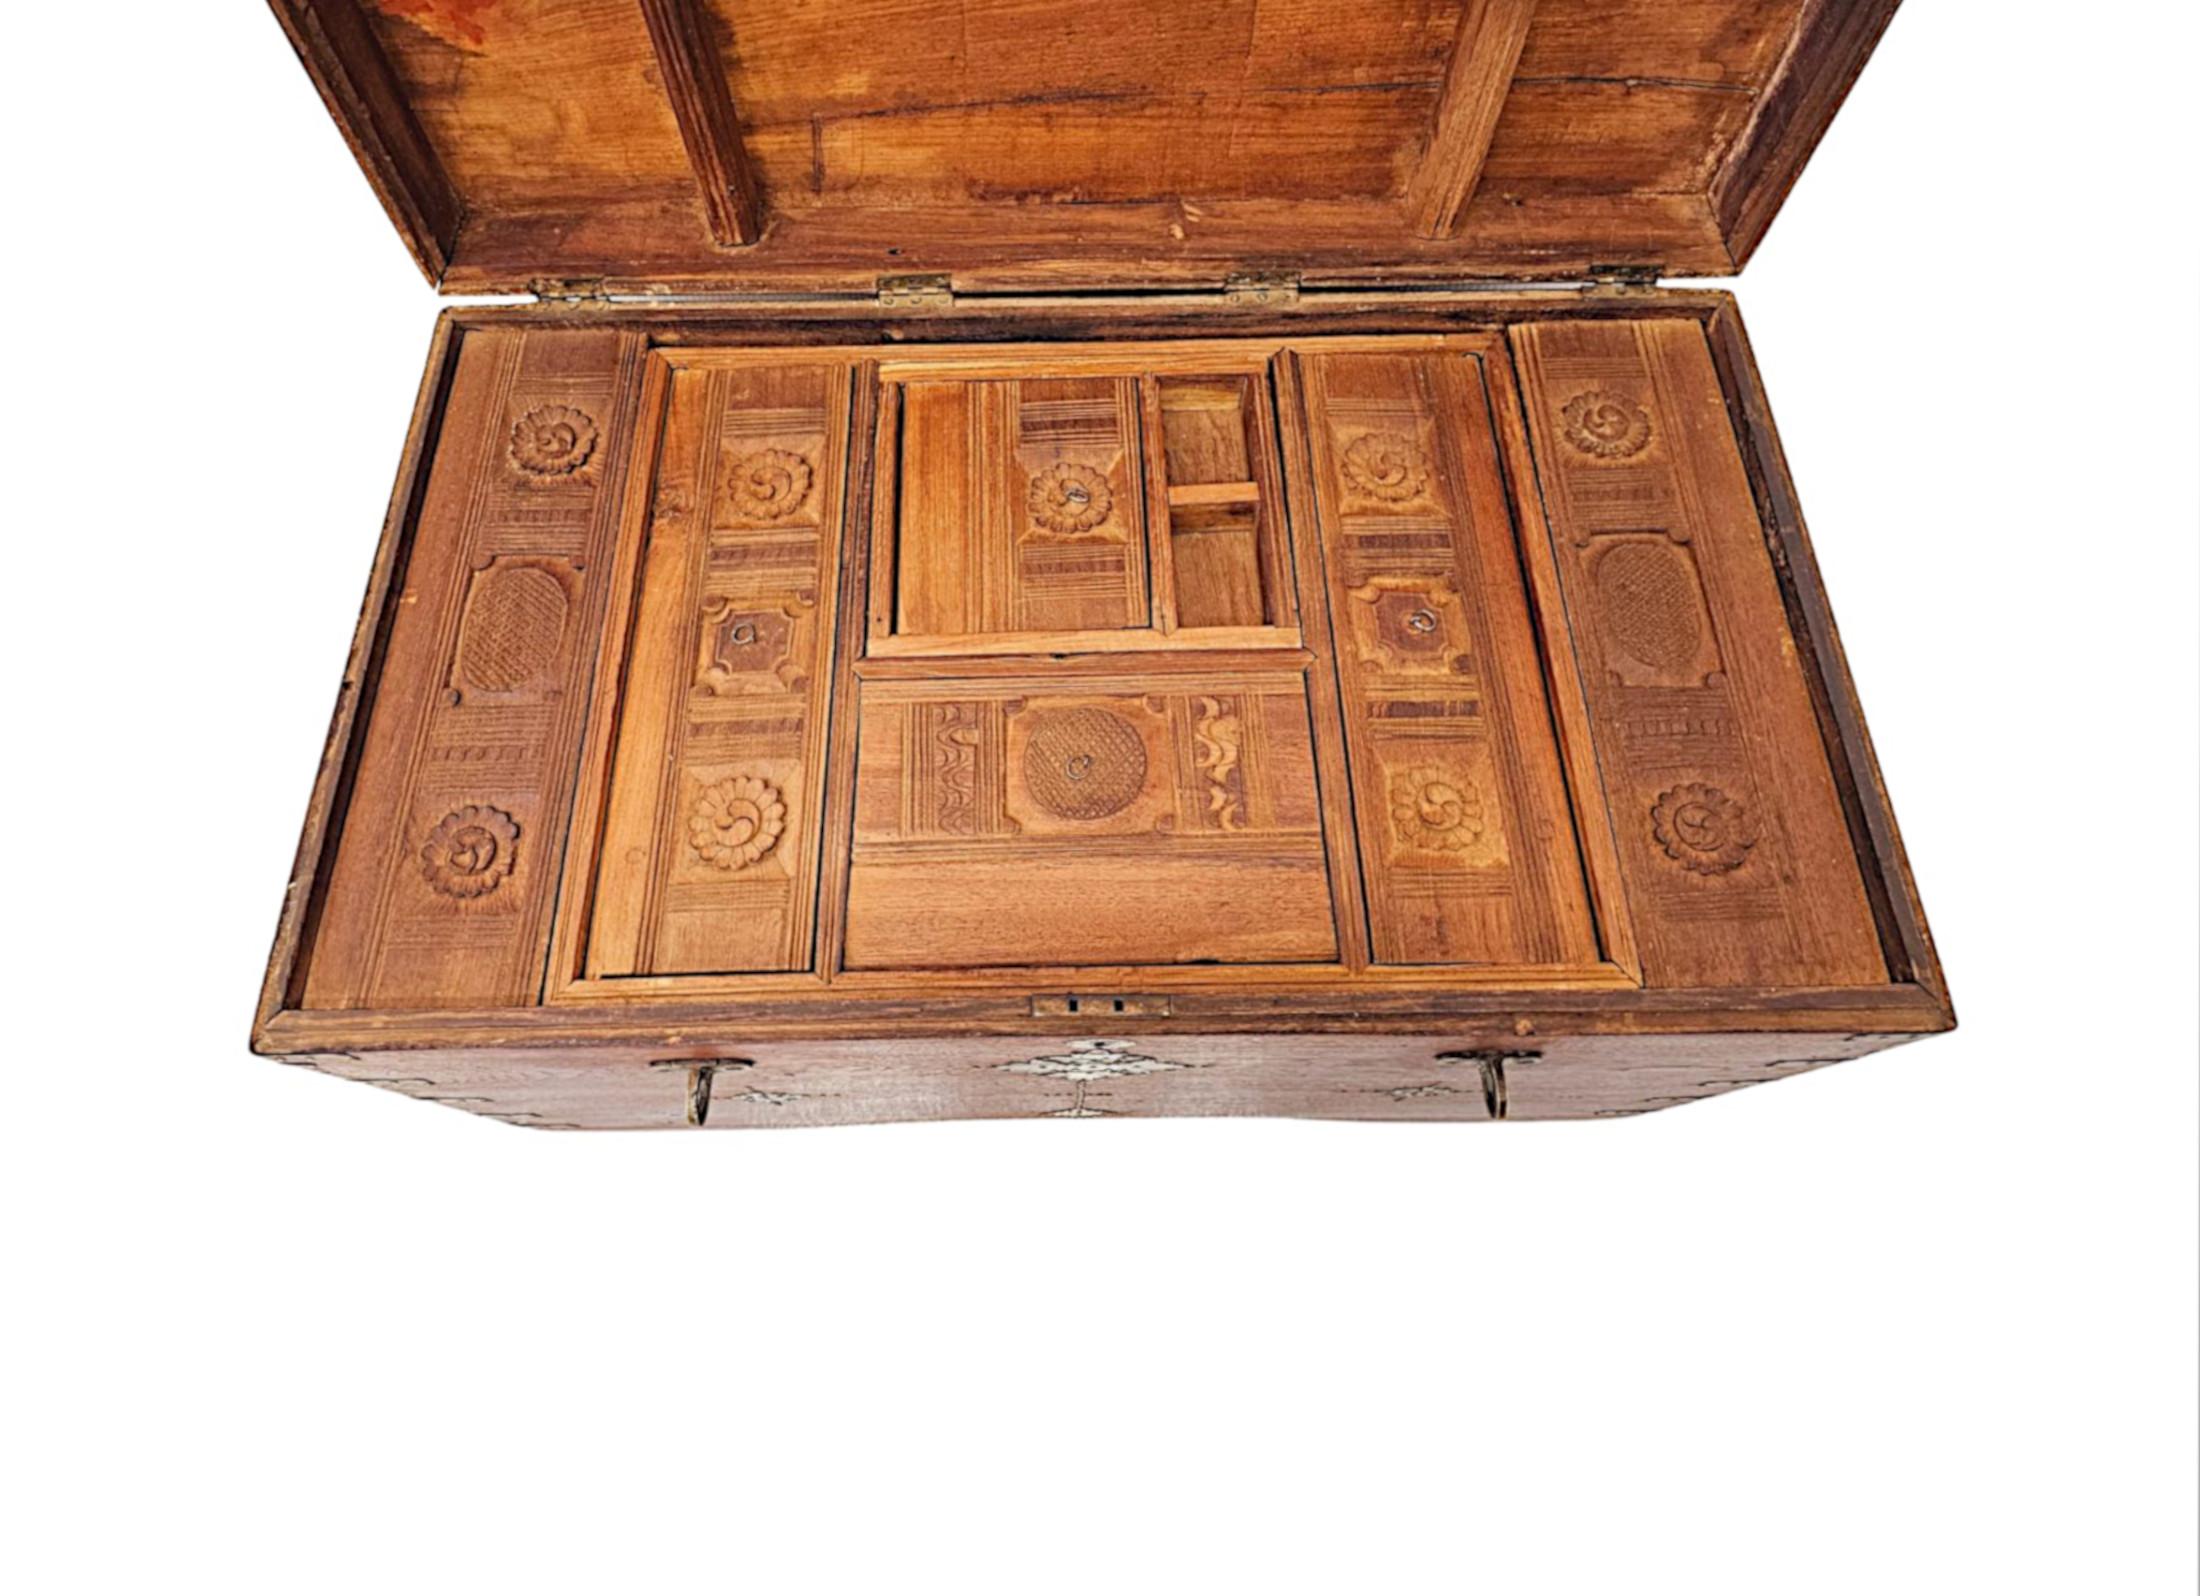  A Very Rare 19th Century Anglo Indian Travelling Trunk For Sale 2